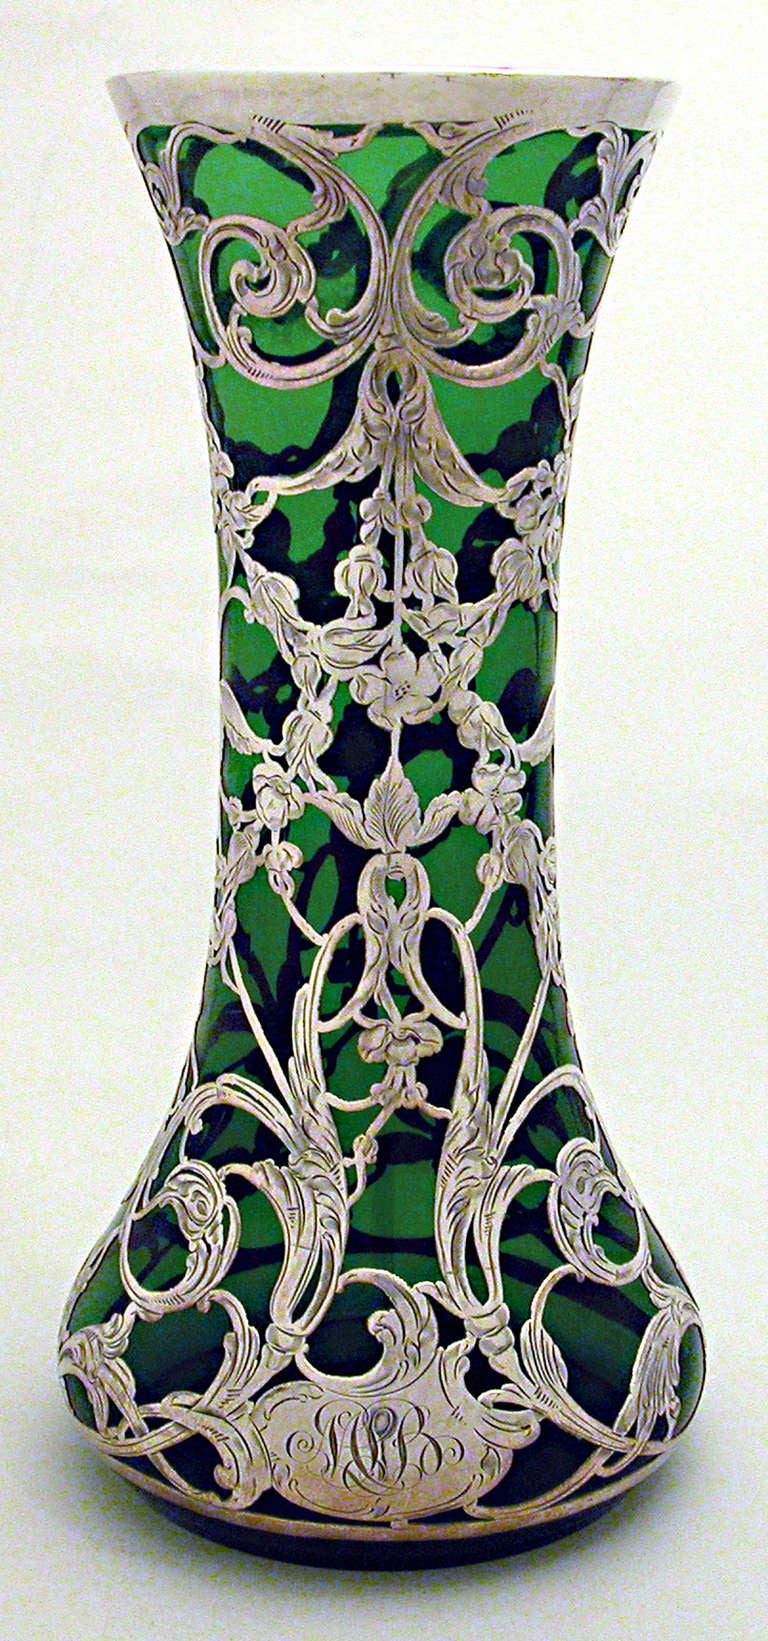 Large green pure silver overlay 999/1000 vase, Circa 1900.
Perfect example of this era.  14 in. high X 7 in. in diameter.